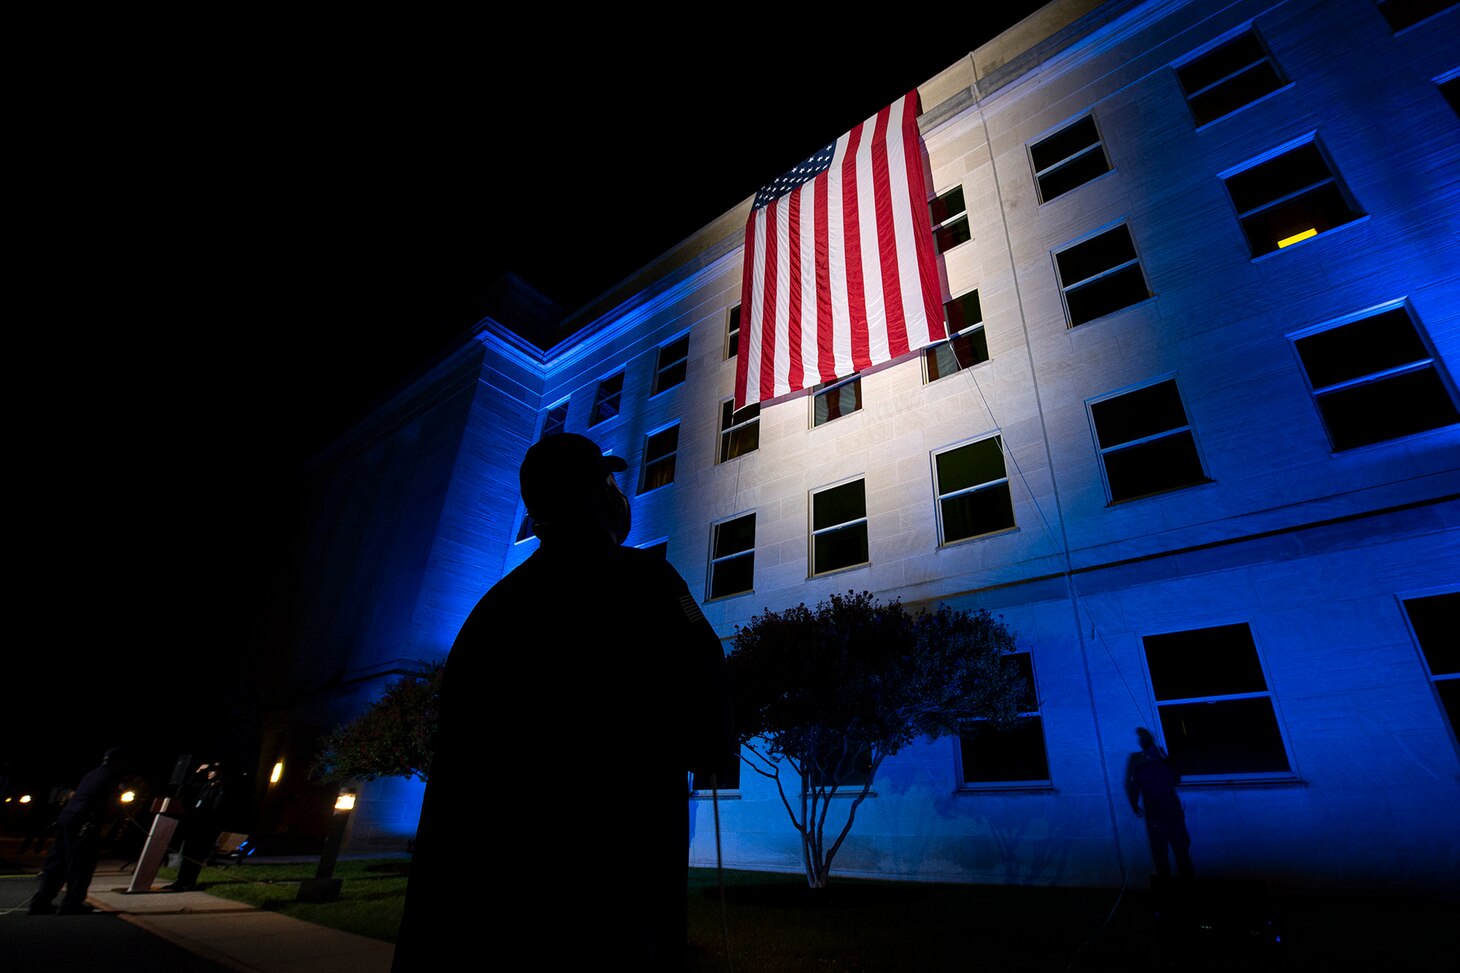 First responders guide an unfurling a flag over the side of the Pentagon before sunrise on the 20th anniversary of the 9/11 terrorist attacks.